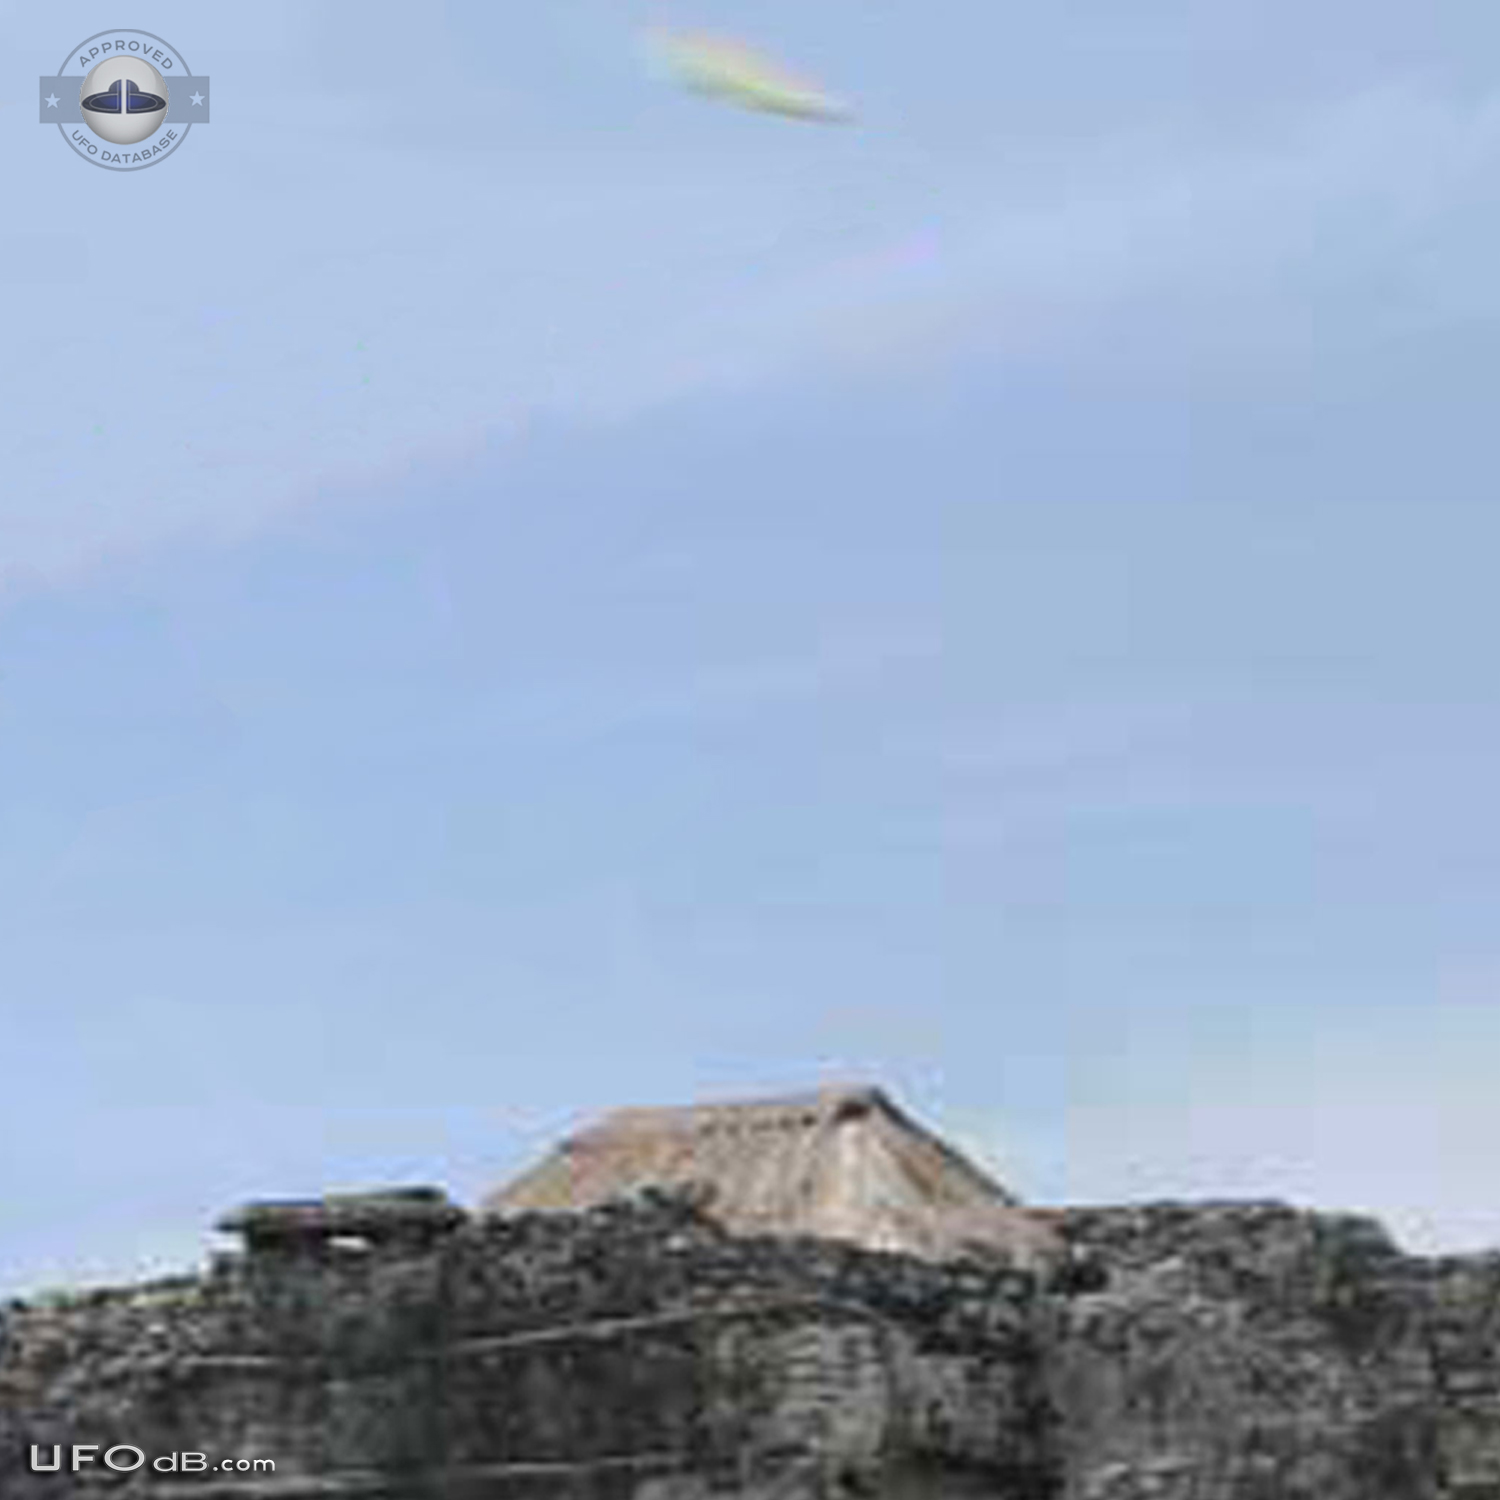 Saucer UFO caught on picture near the Maya city ruins of Tulum - 2011 UFO Picture #413-3